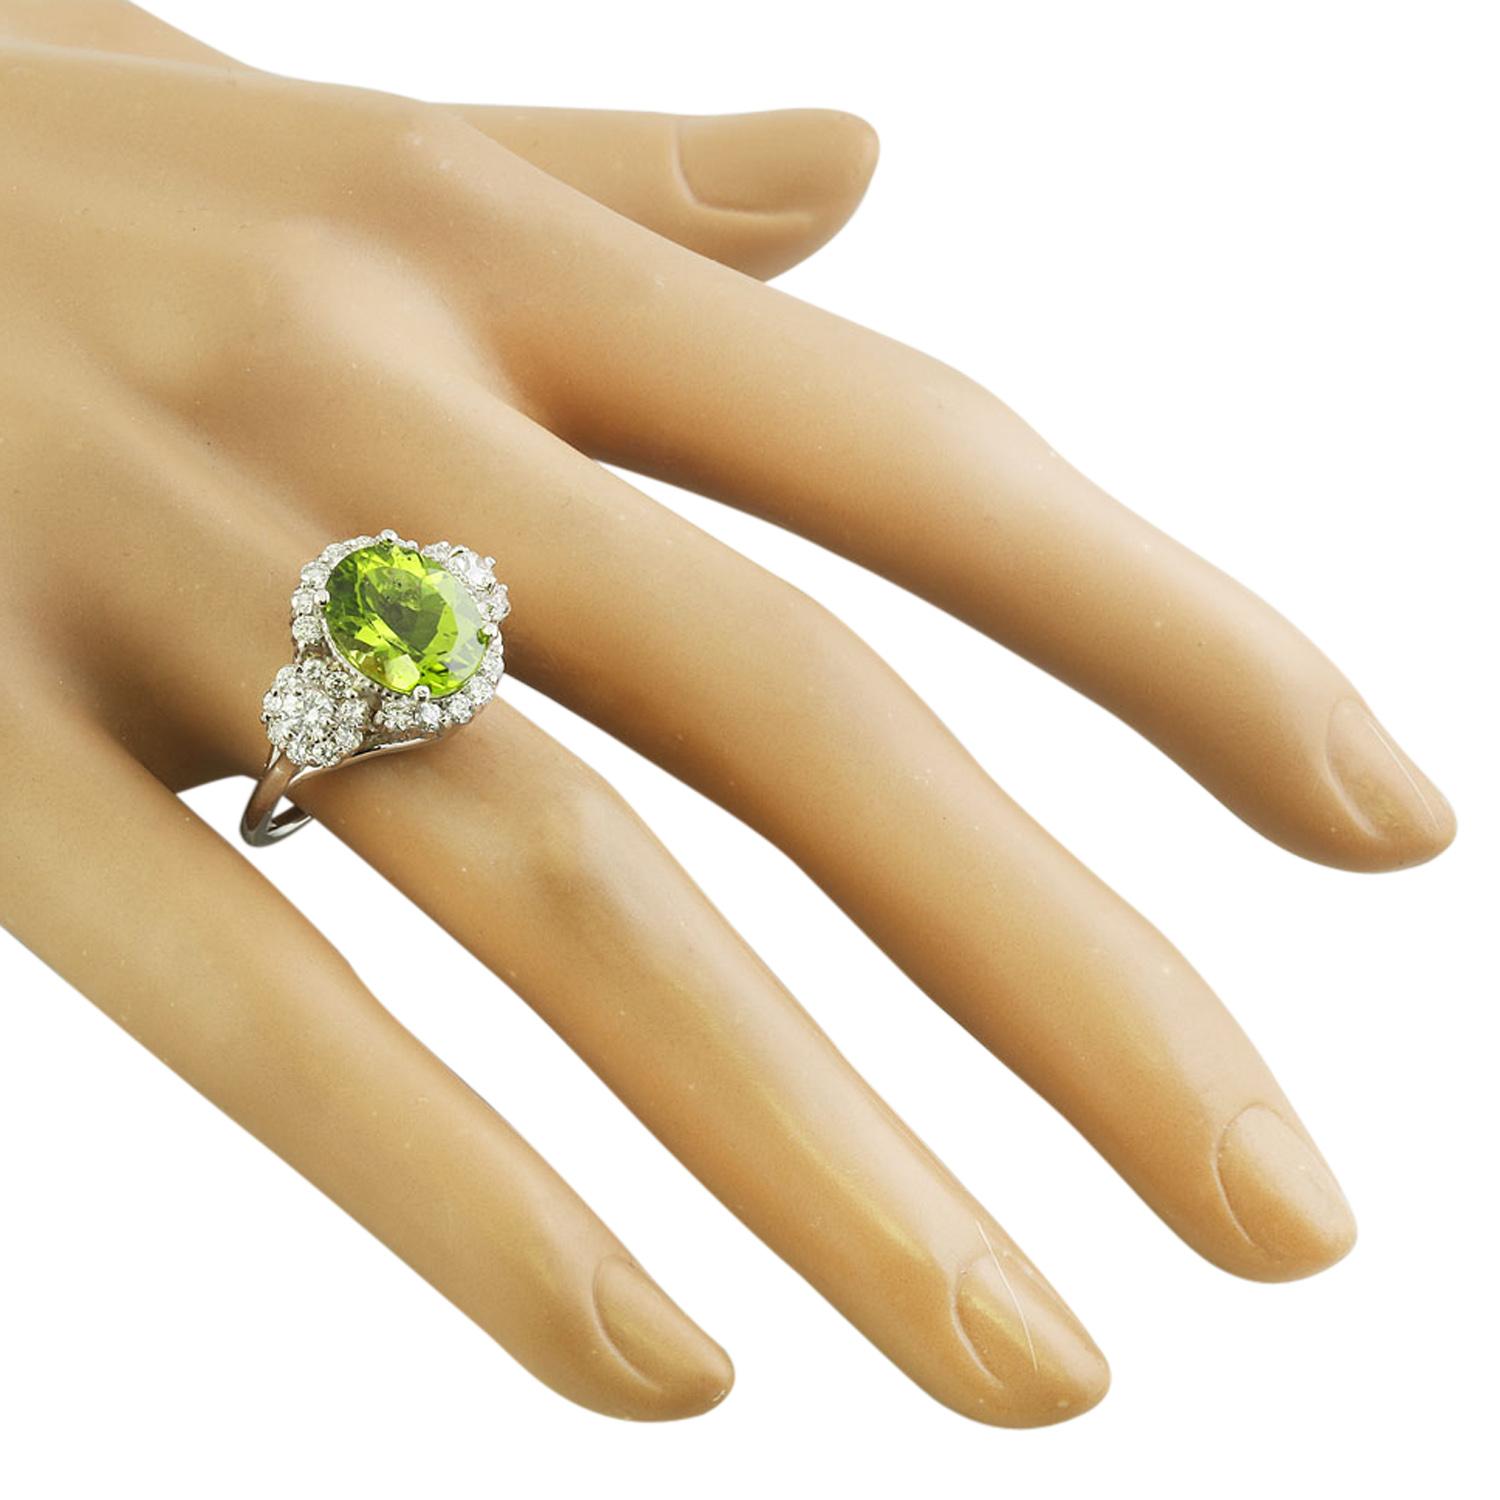 Exquisite Natural Peridot Diamond Ring In 14 Karat Solid White Gold  In New Condition For Sale In Los Angeles, CA